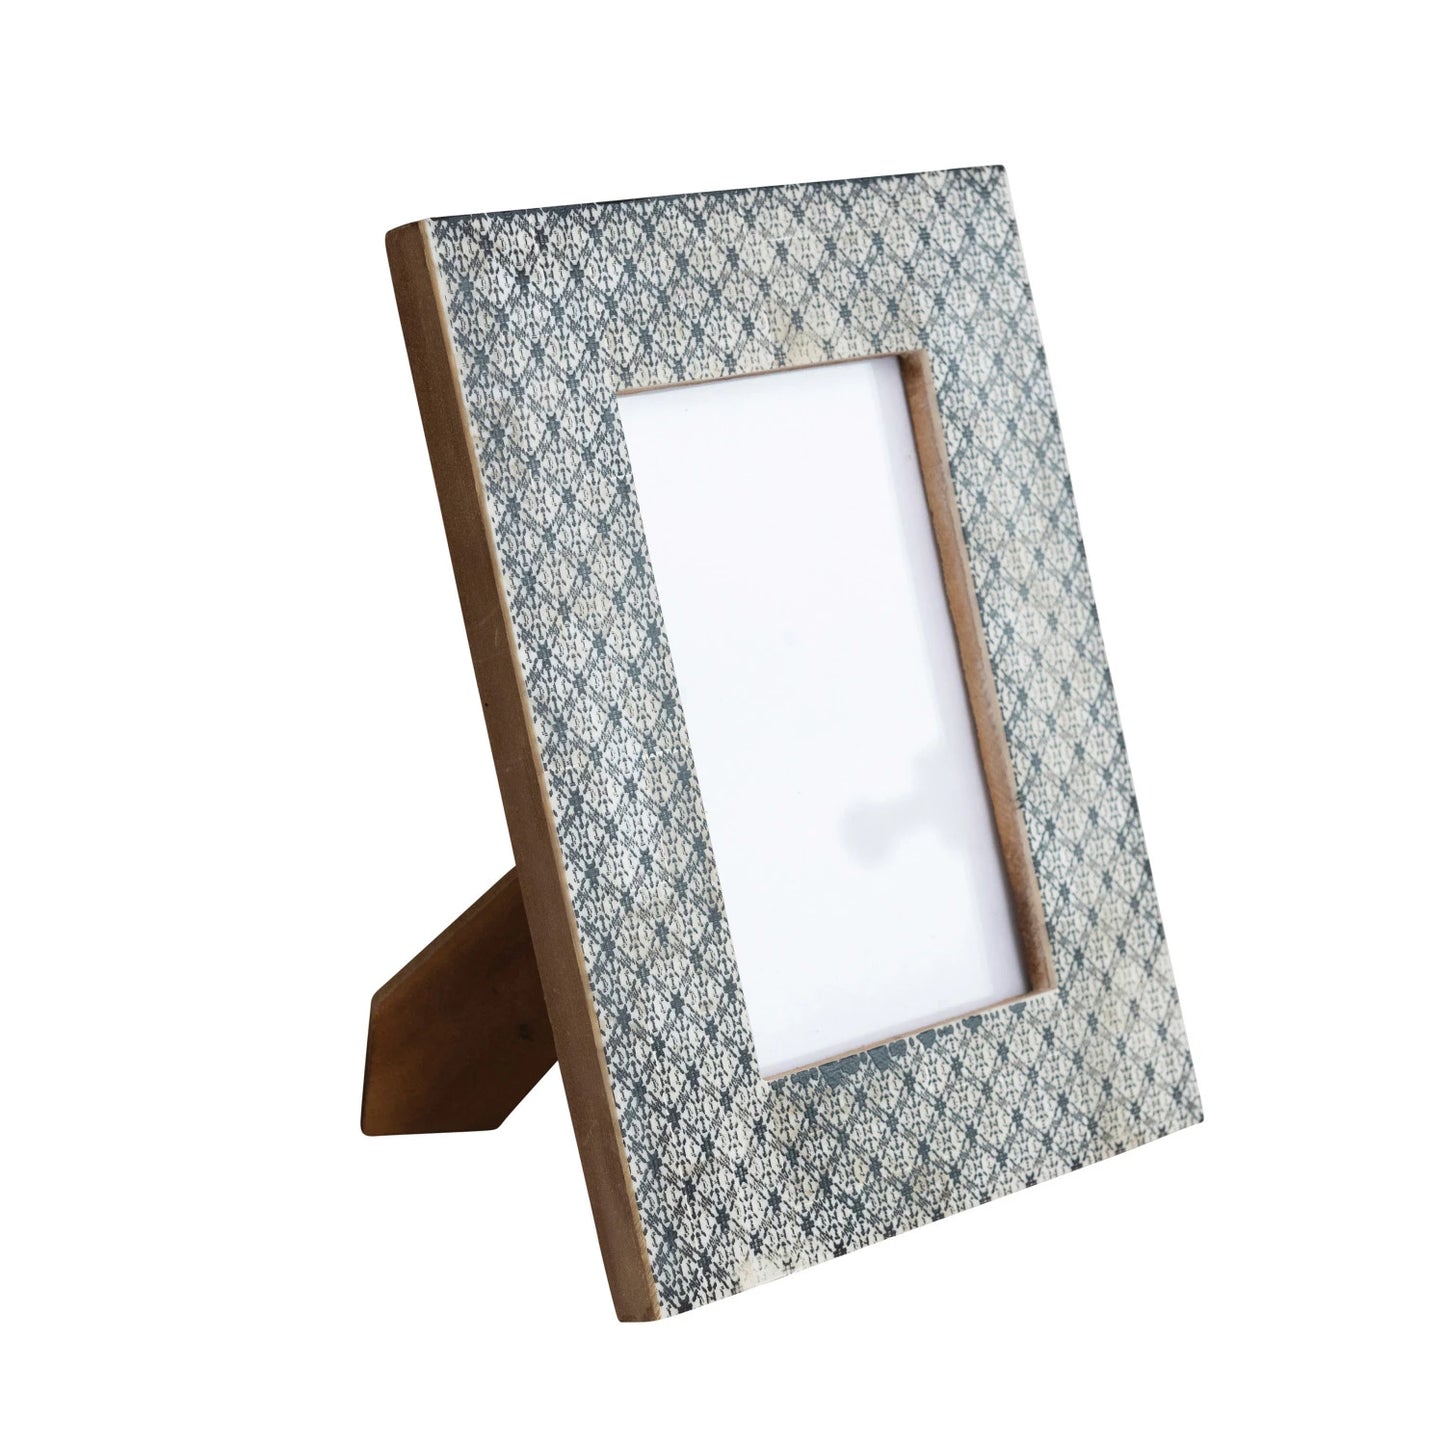 Resin & Glass Photo Frame w/ Pattern, Charcoal Color